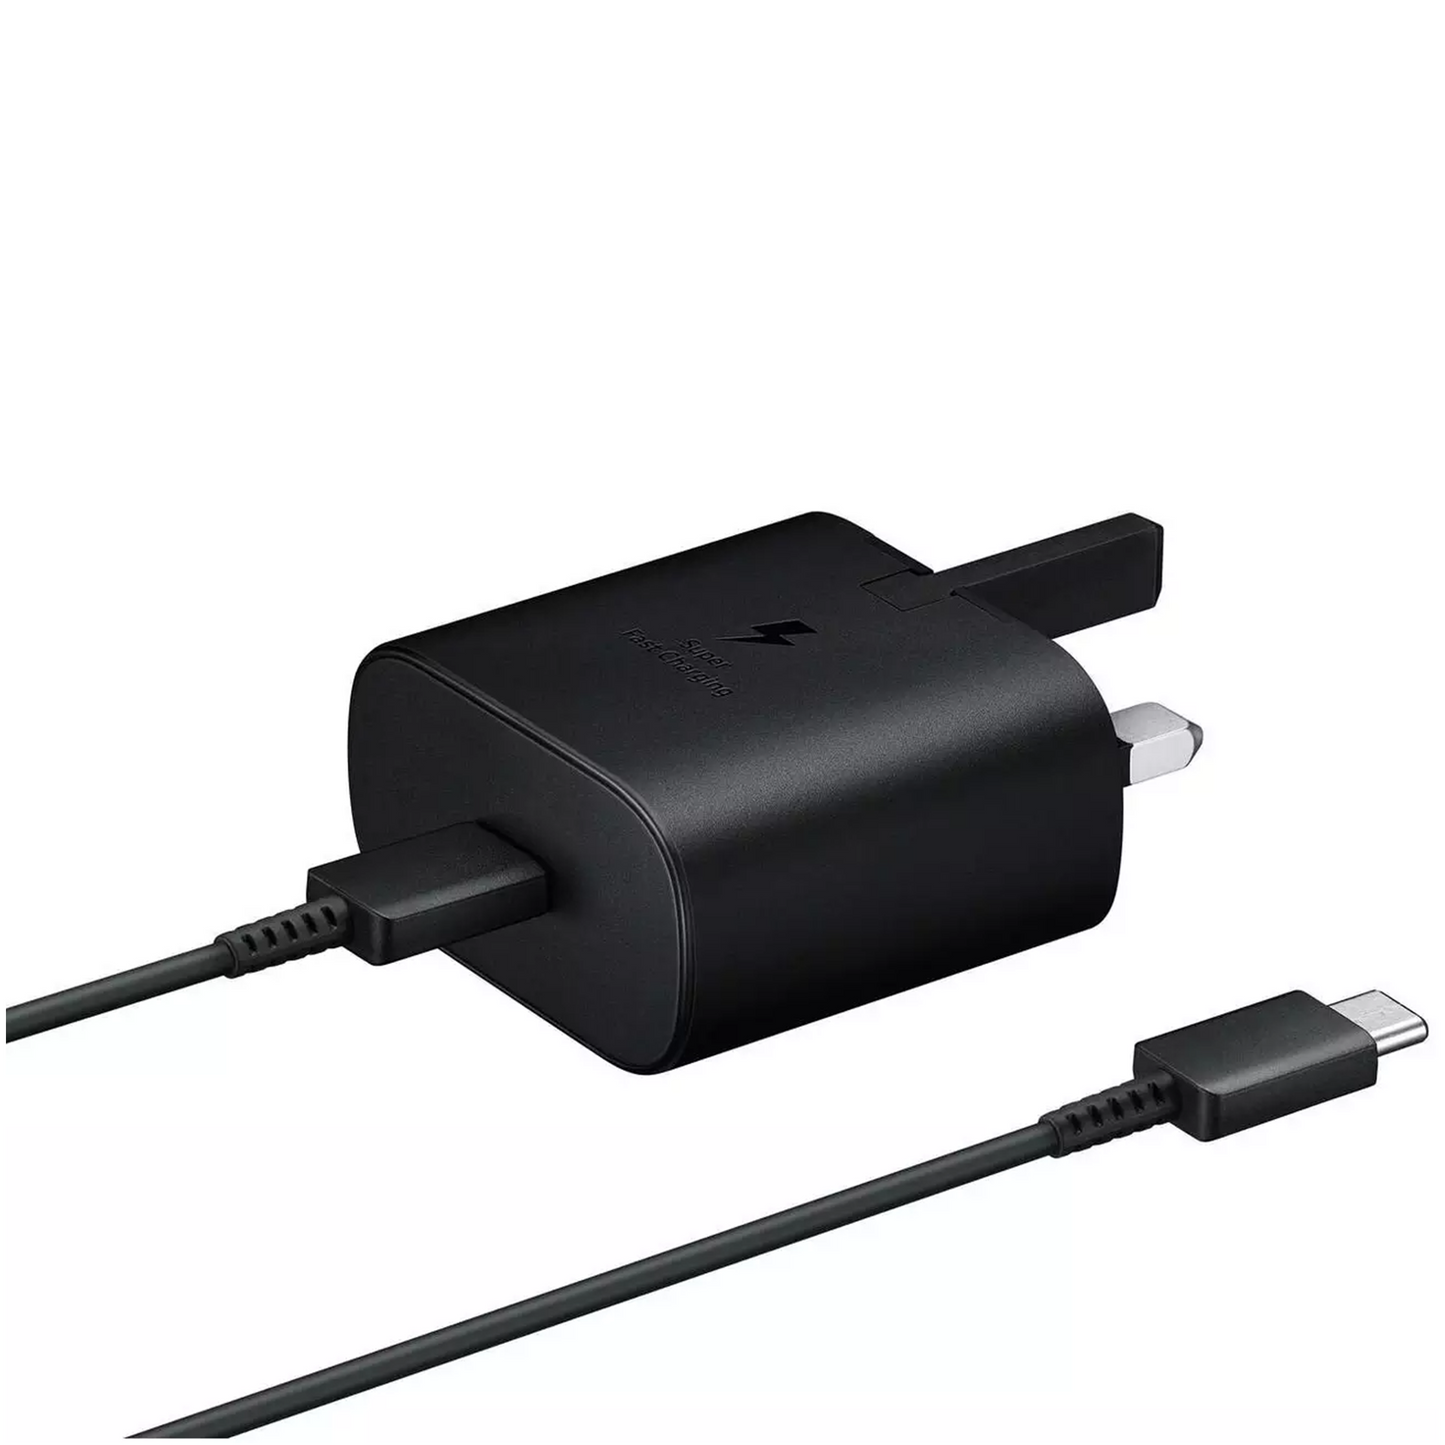 Genuine Samsung Super Fast 25w Pd Adapter Charger with USB-C Cable UK Black